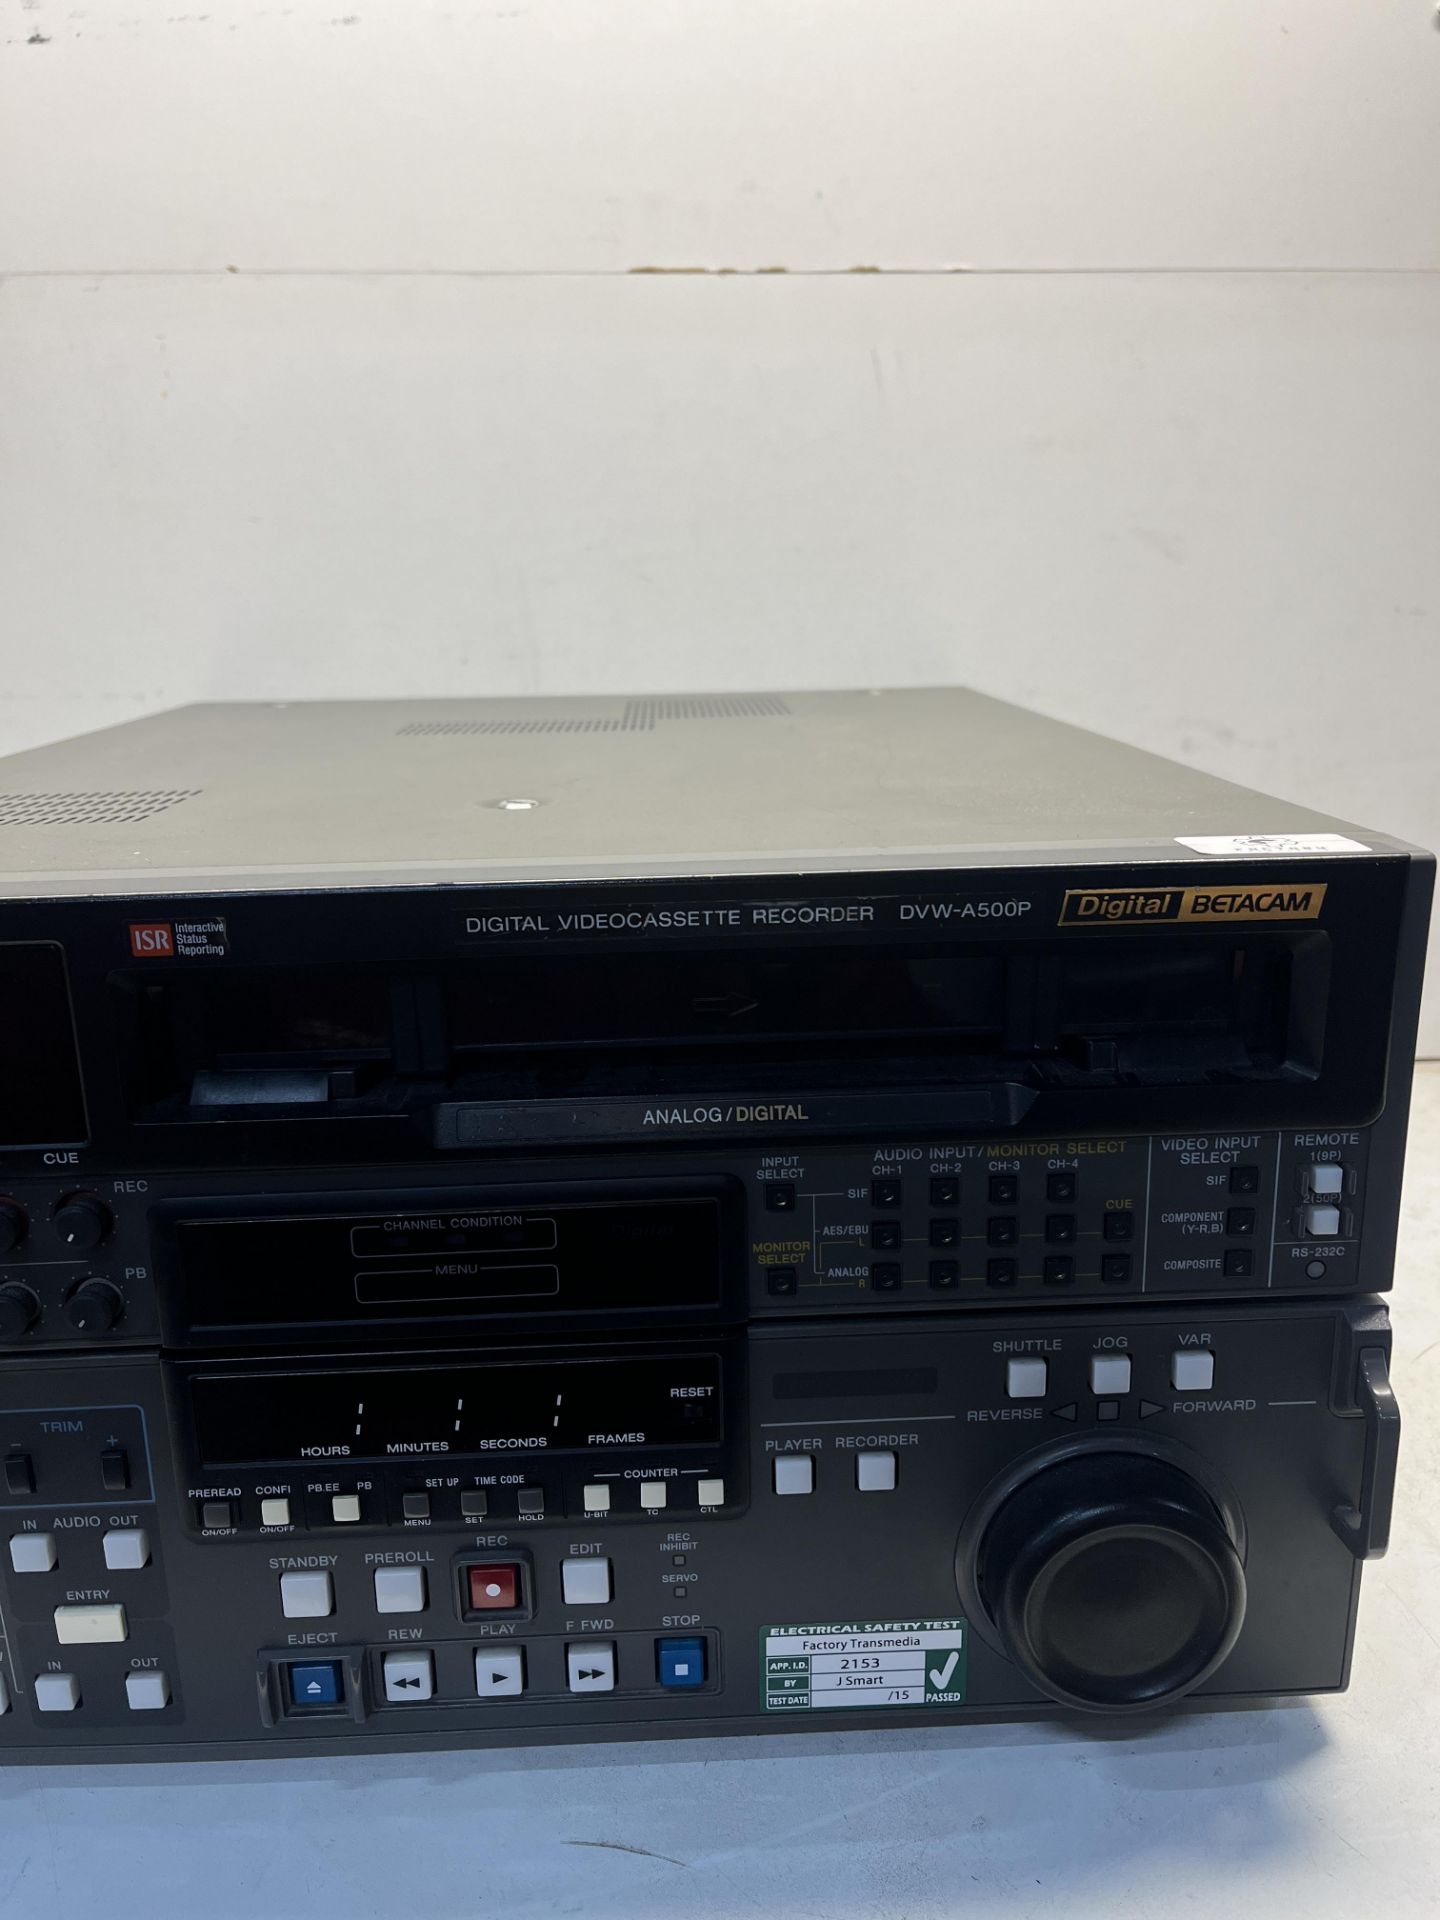 Sony Digital Videocassette Recorder DVW-A500P - Image 2 of 7